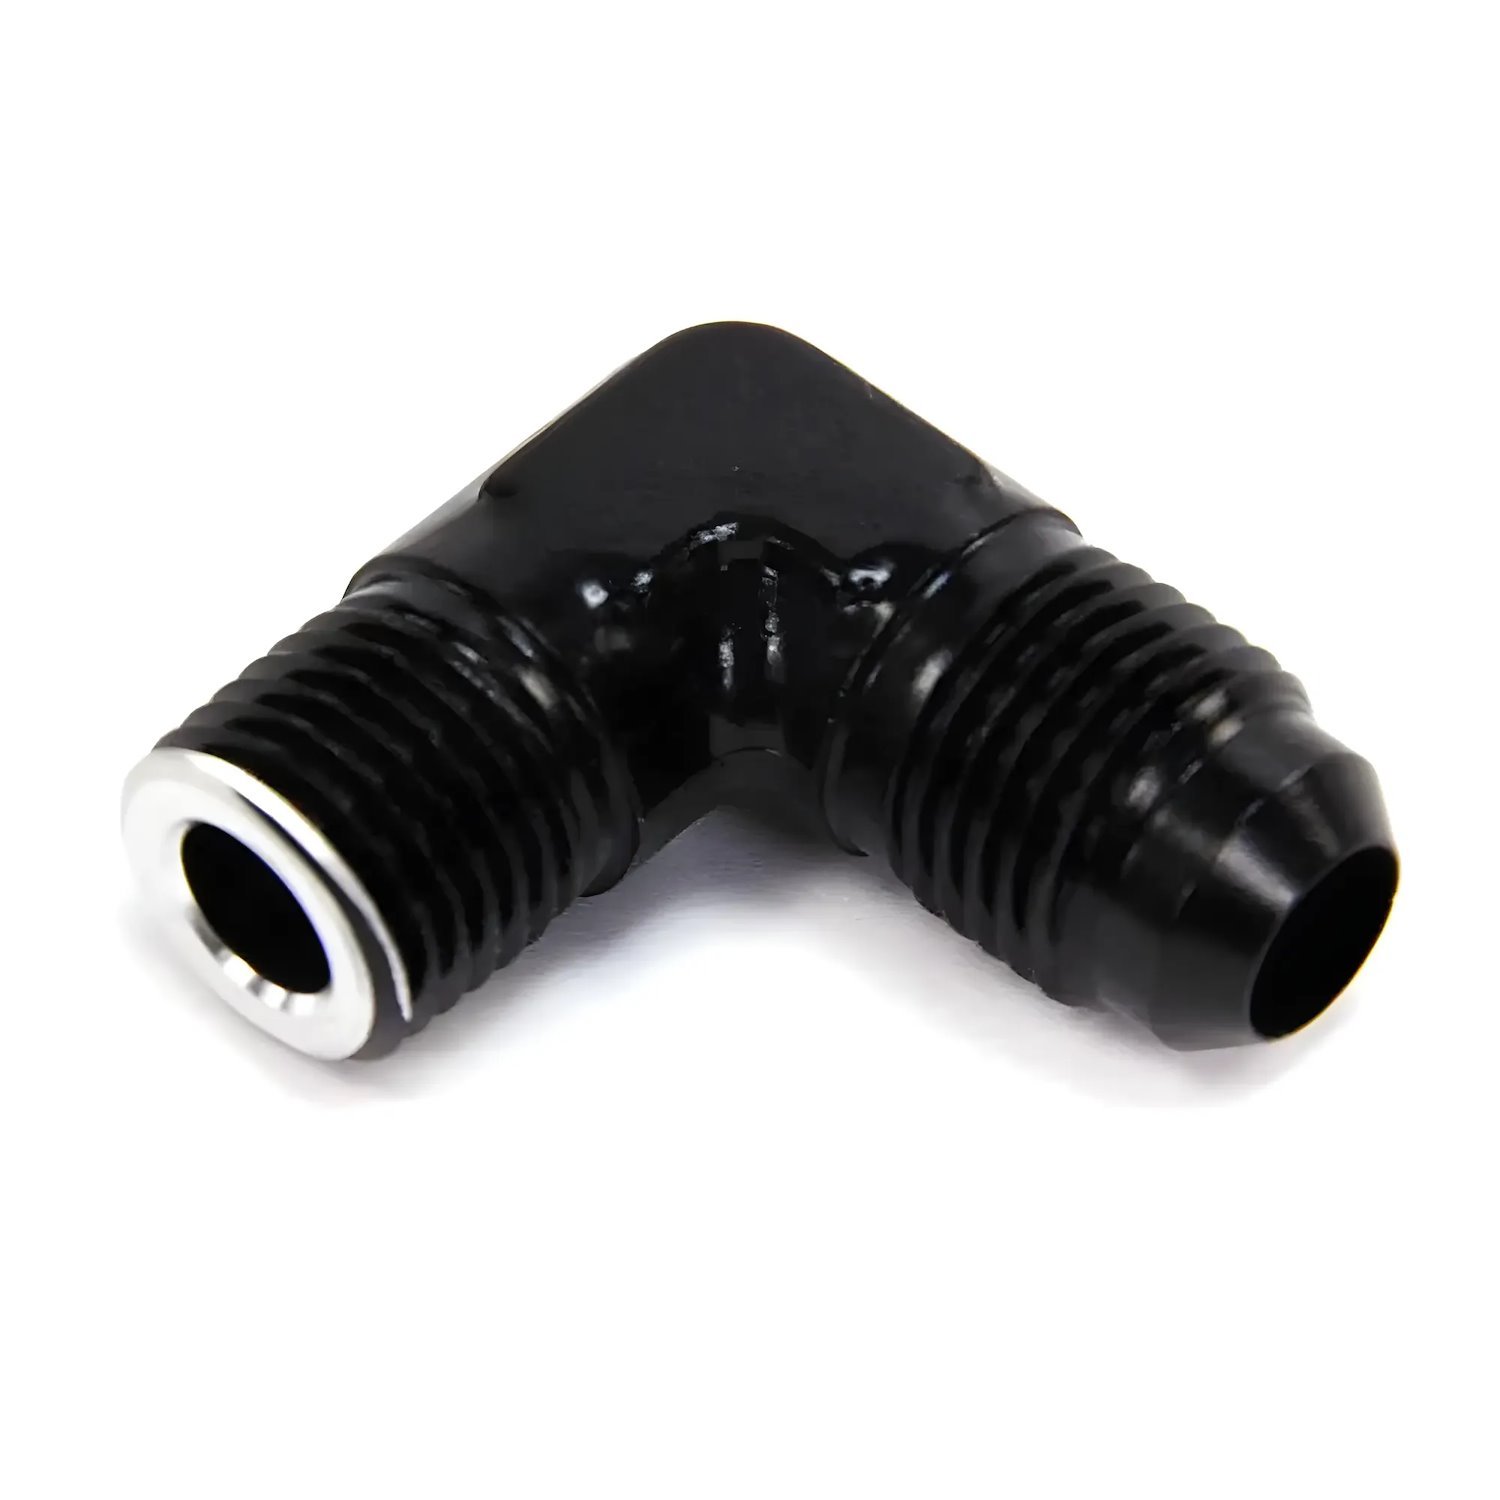 00-01355-N 1/4 in. NPT X 6AN 90-Degree Fitting, Male/Male, Black, For Nitrous Solenoid